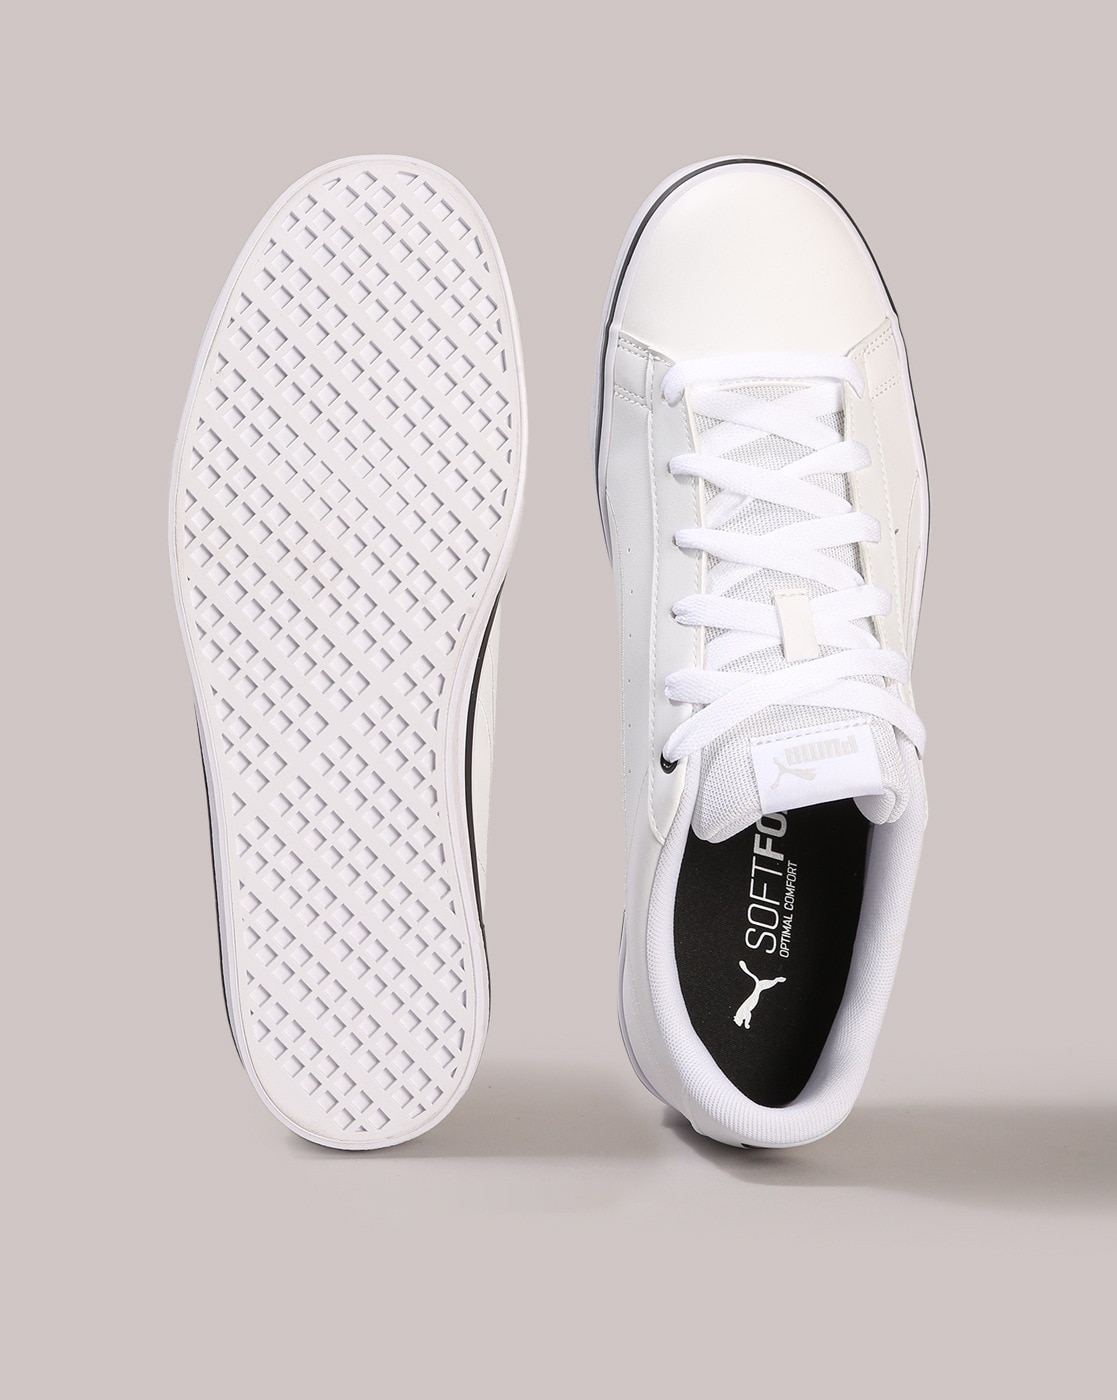 Buy White Casual Shoes for Men by Puma Online | Ajio.com